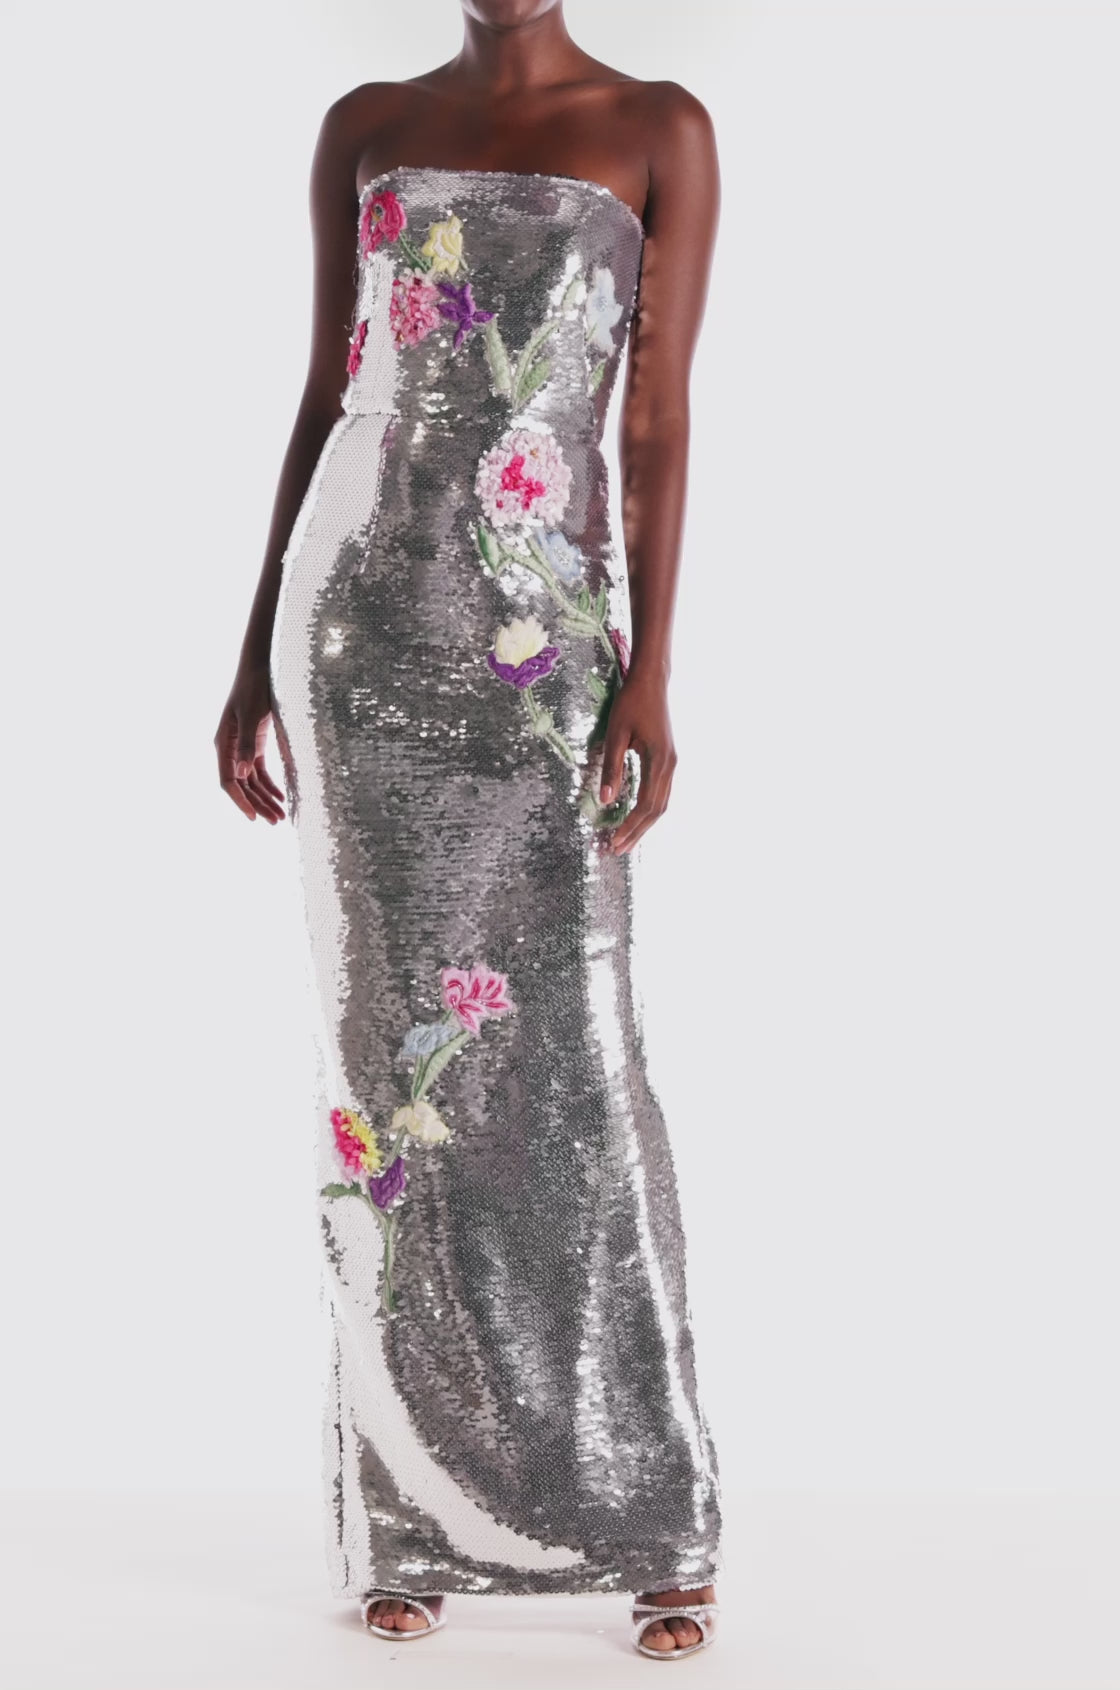 Monique Lhuillier strapless silver sequin column gown with floral embroidery.